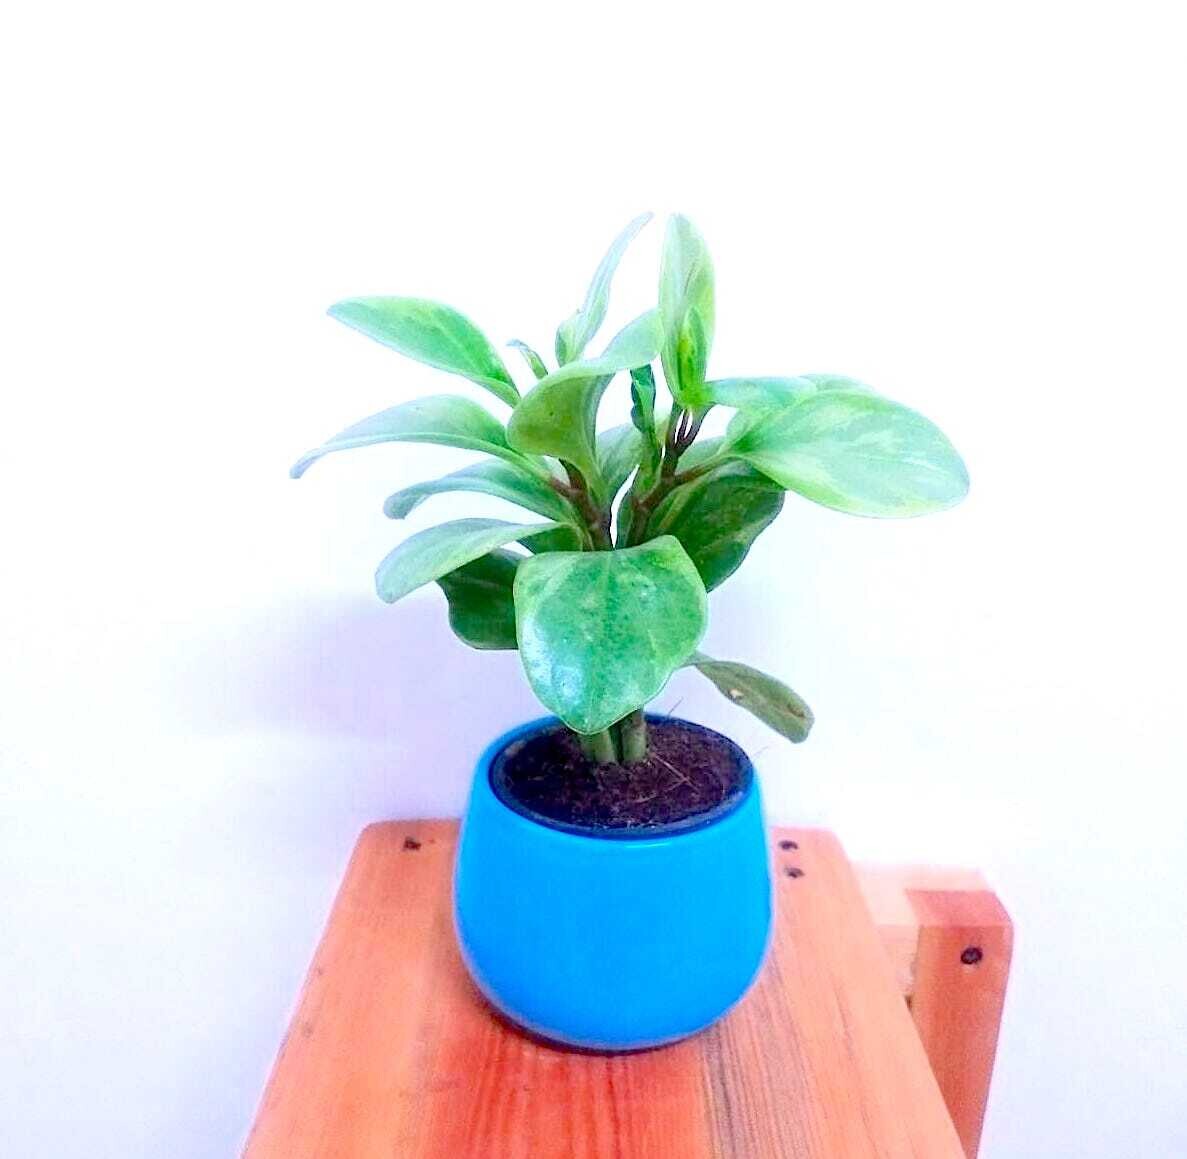 Variegated Peperomia Plant in 4 inches Ceramic Bowl